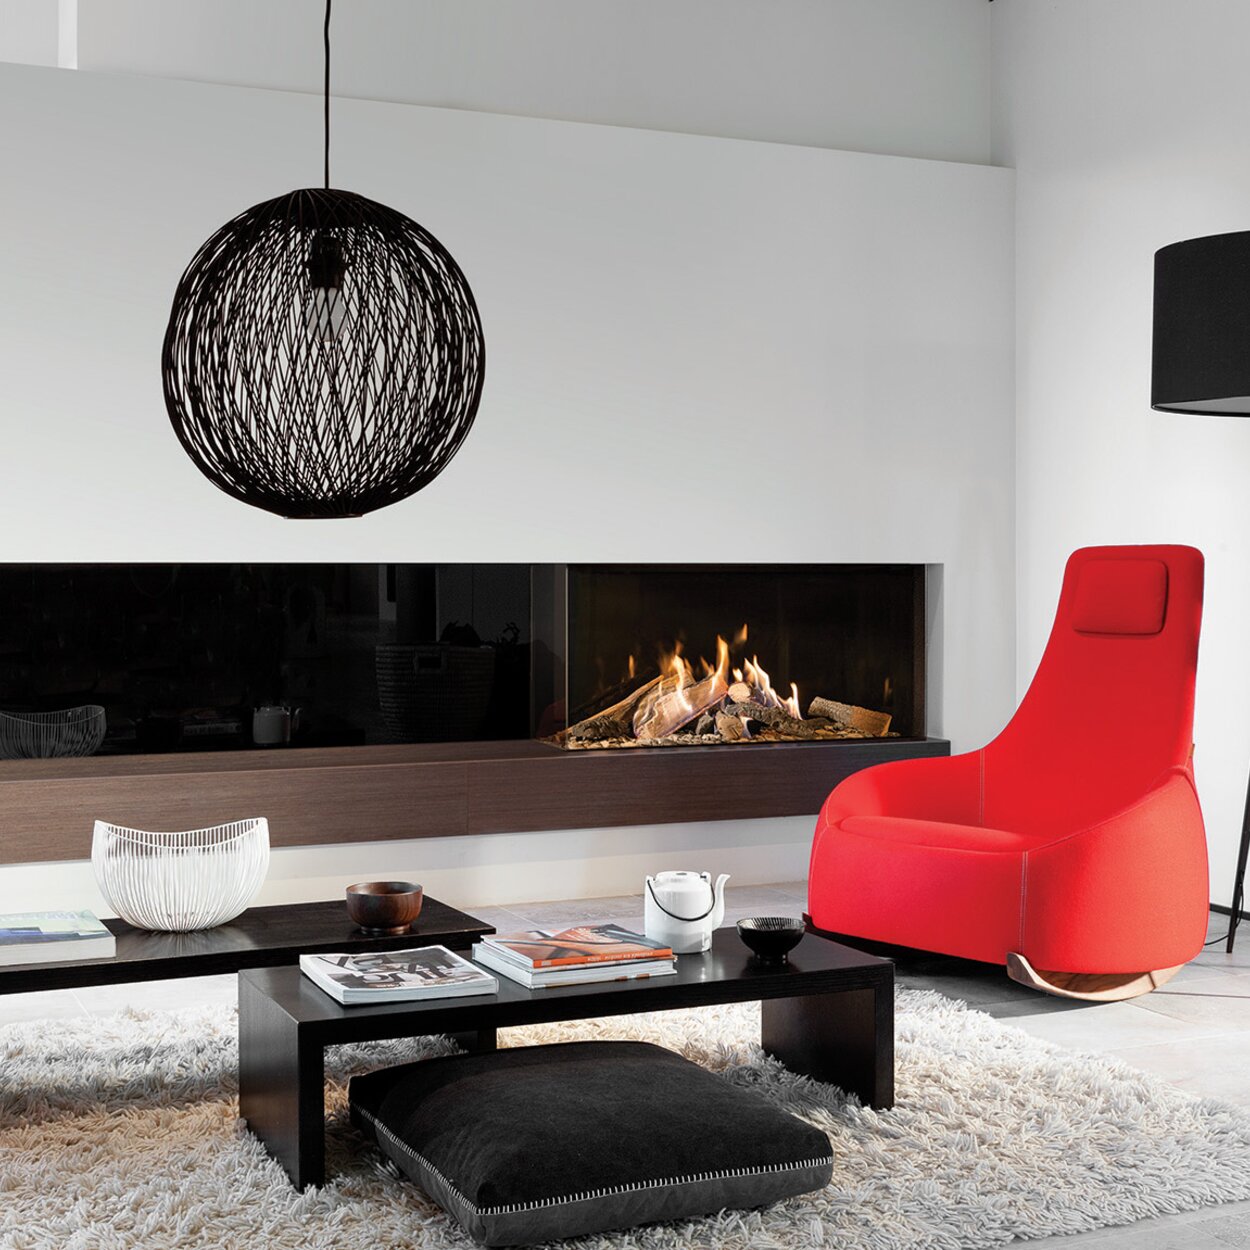 Gas fireplace GP110/55C 2-sided glazed on wooden base with black back wall and white panelling in modern living room